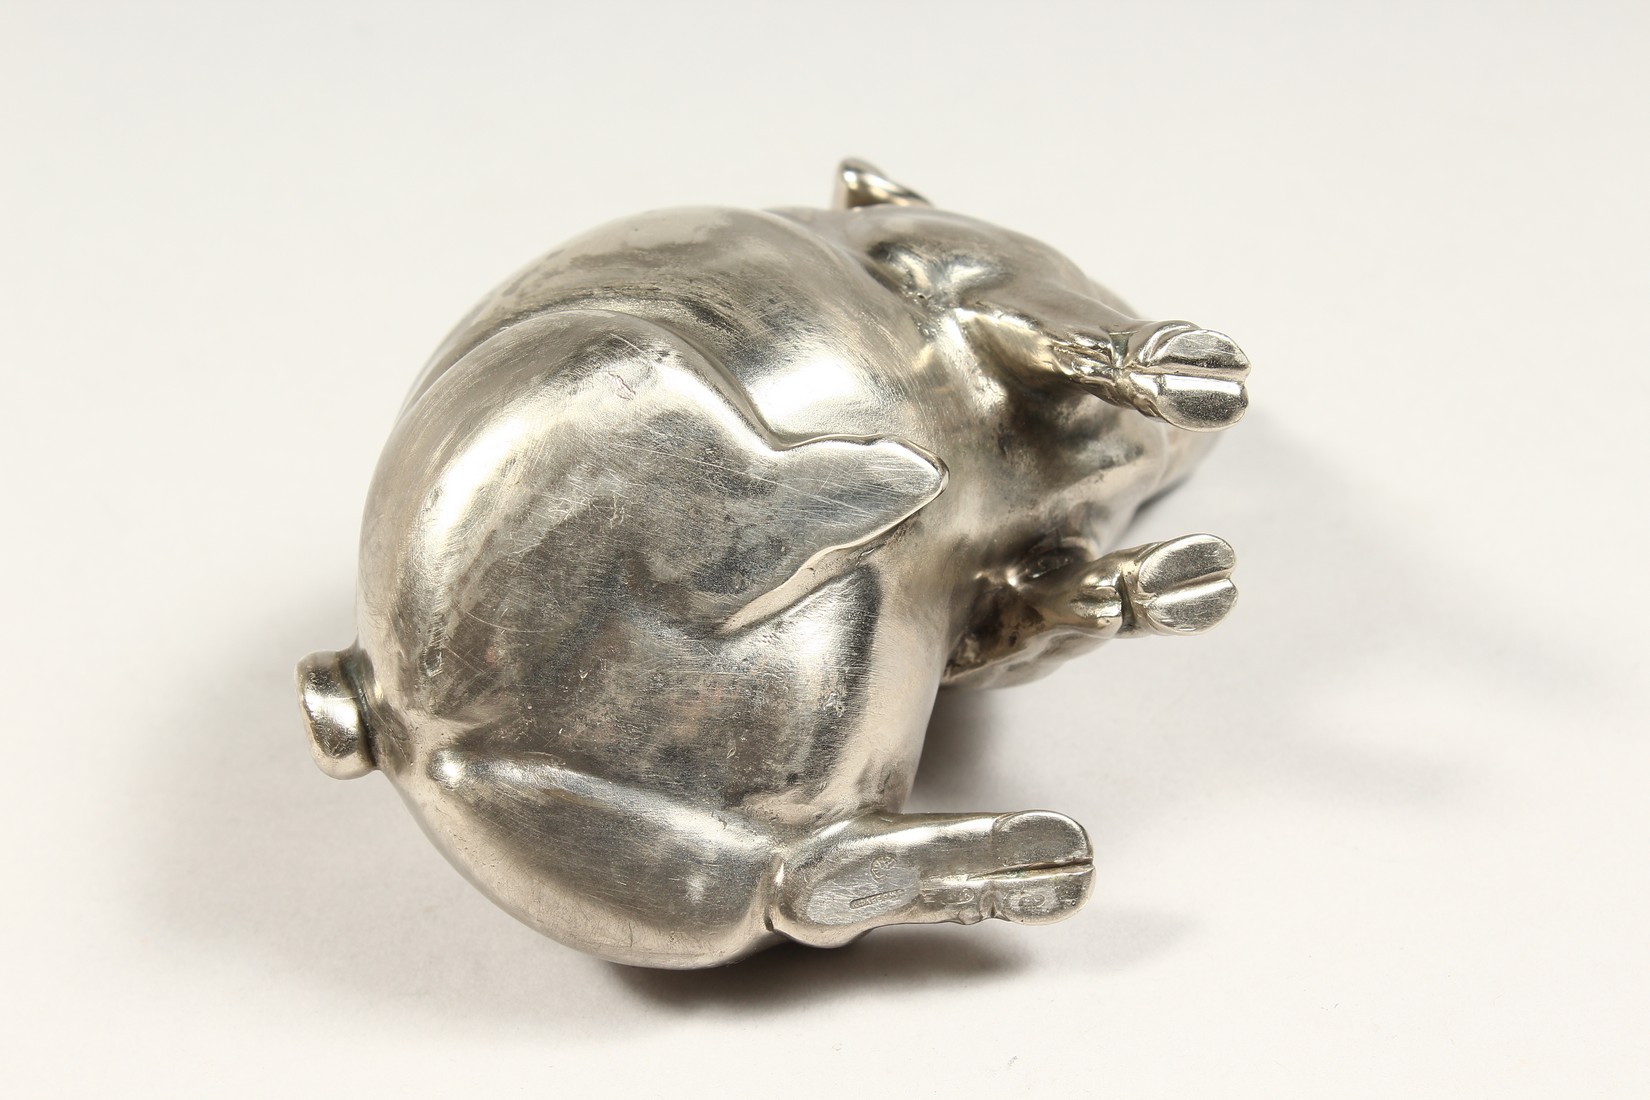 A SUPERB RUSSIAN SILVER SEATED PIG MATCH HOLDER 3.75ins high, 4.5ins long With Faberge mark. - Image 5 of 6